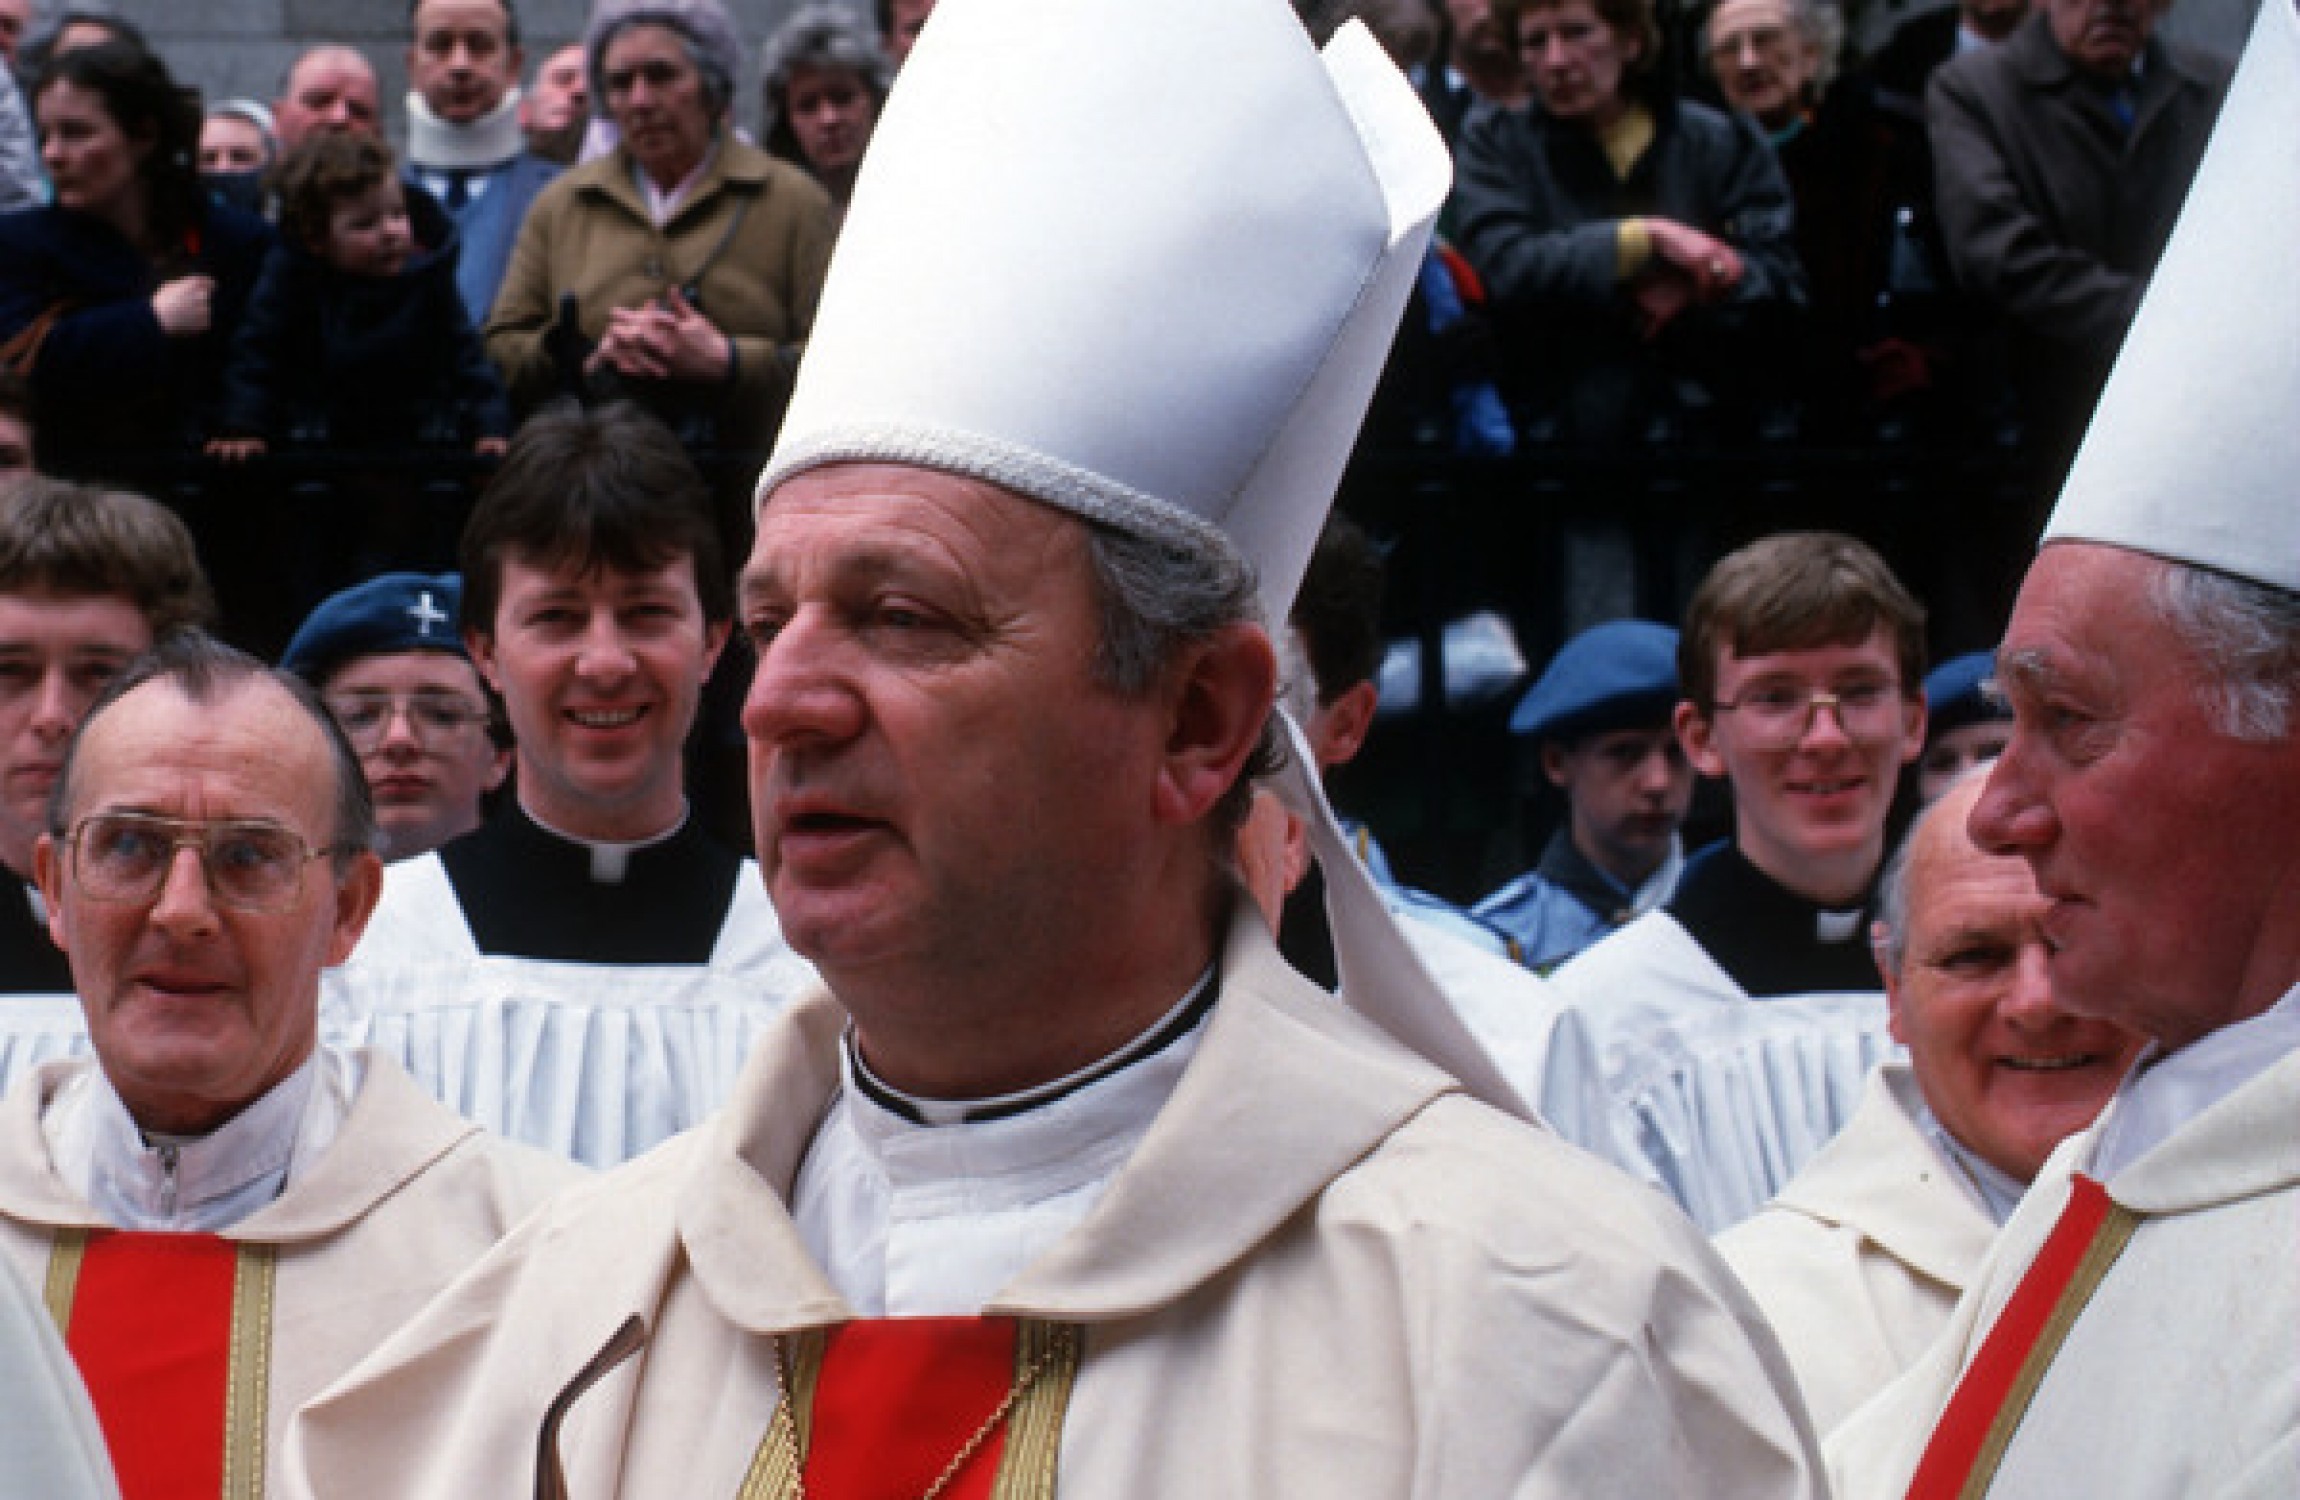 Eamon Casey: Former Bishop of Galway who fathered child dies aged 89